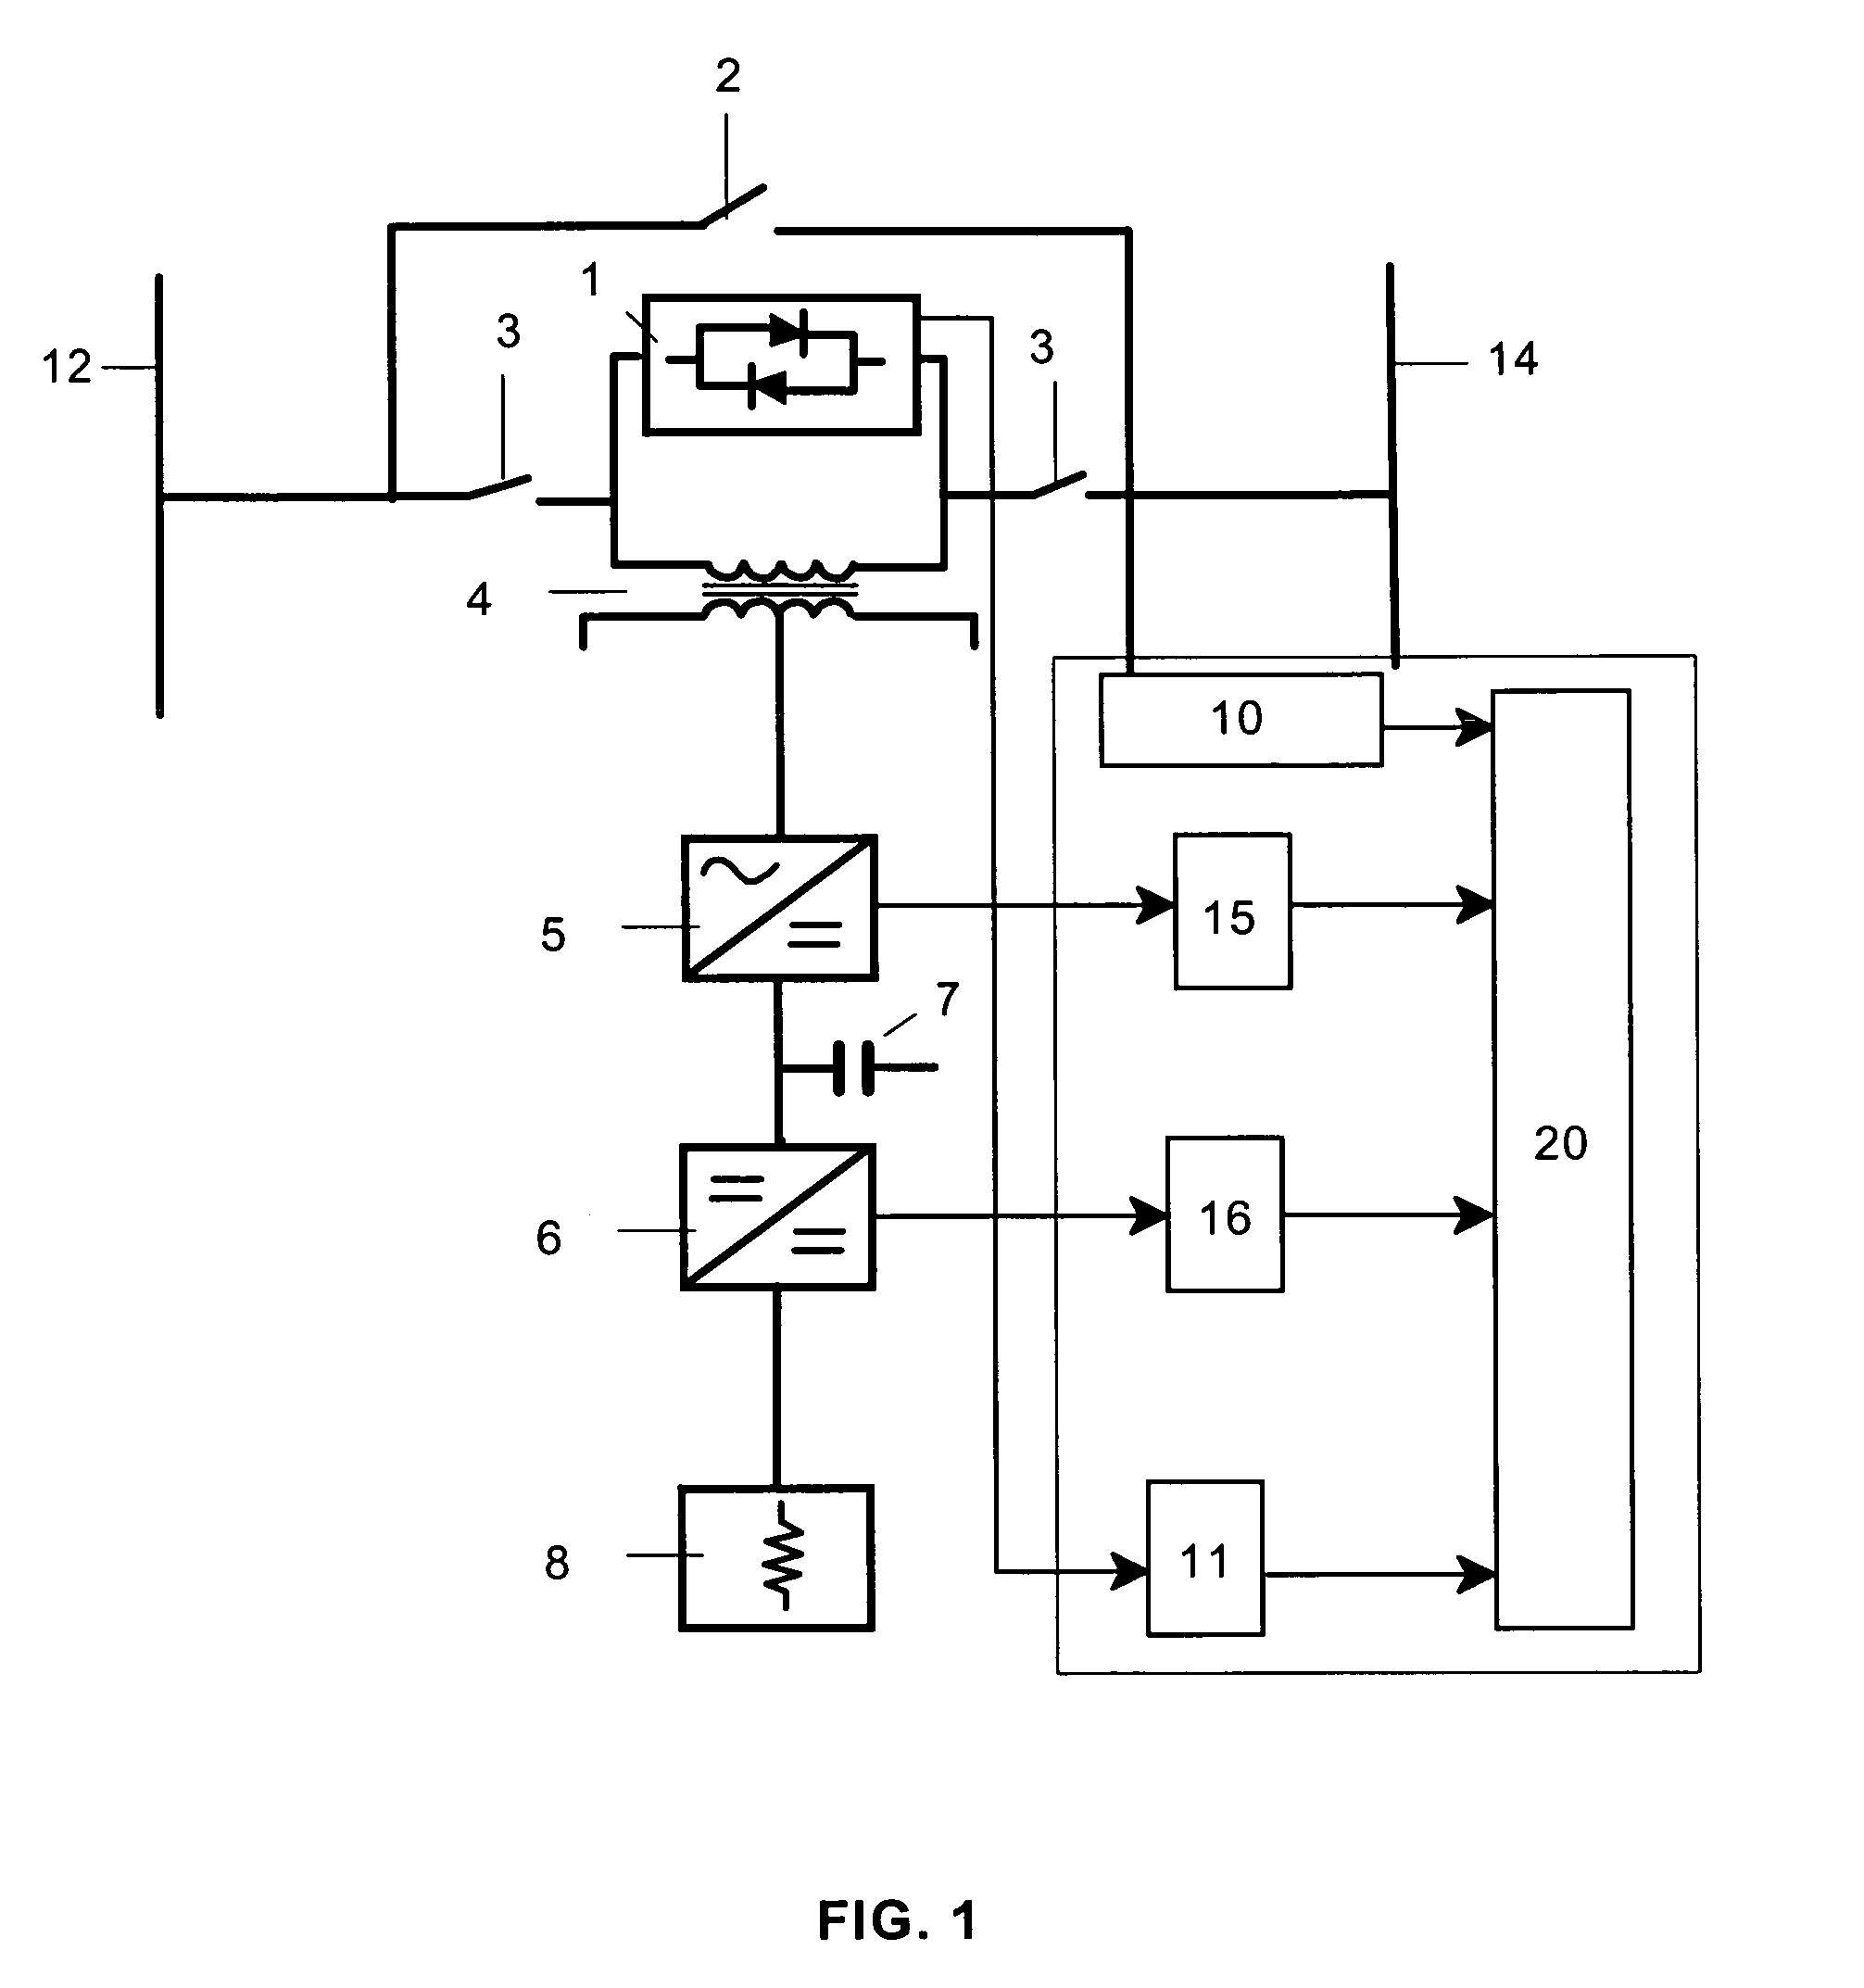 Method and device for preventing the disconnection of an electric power generating plant from the electrical grid